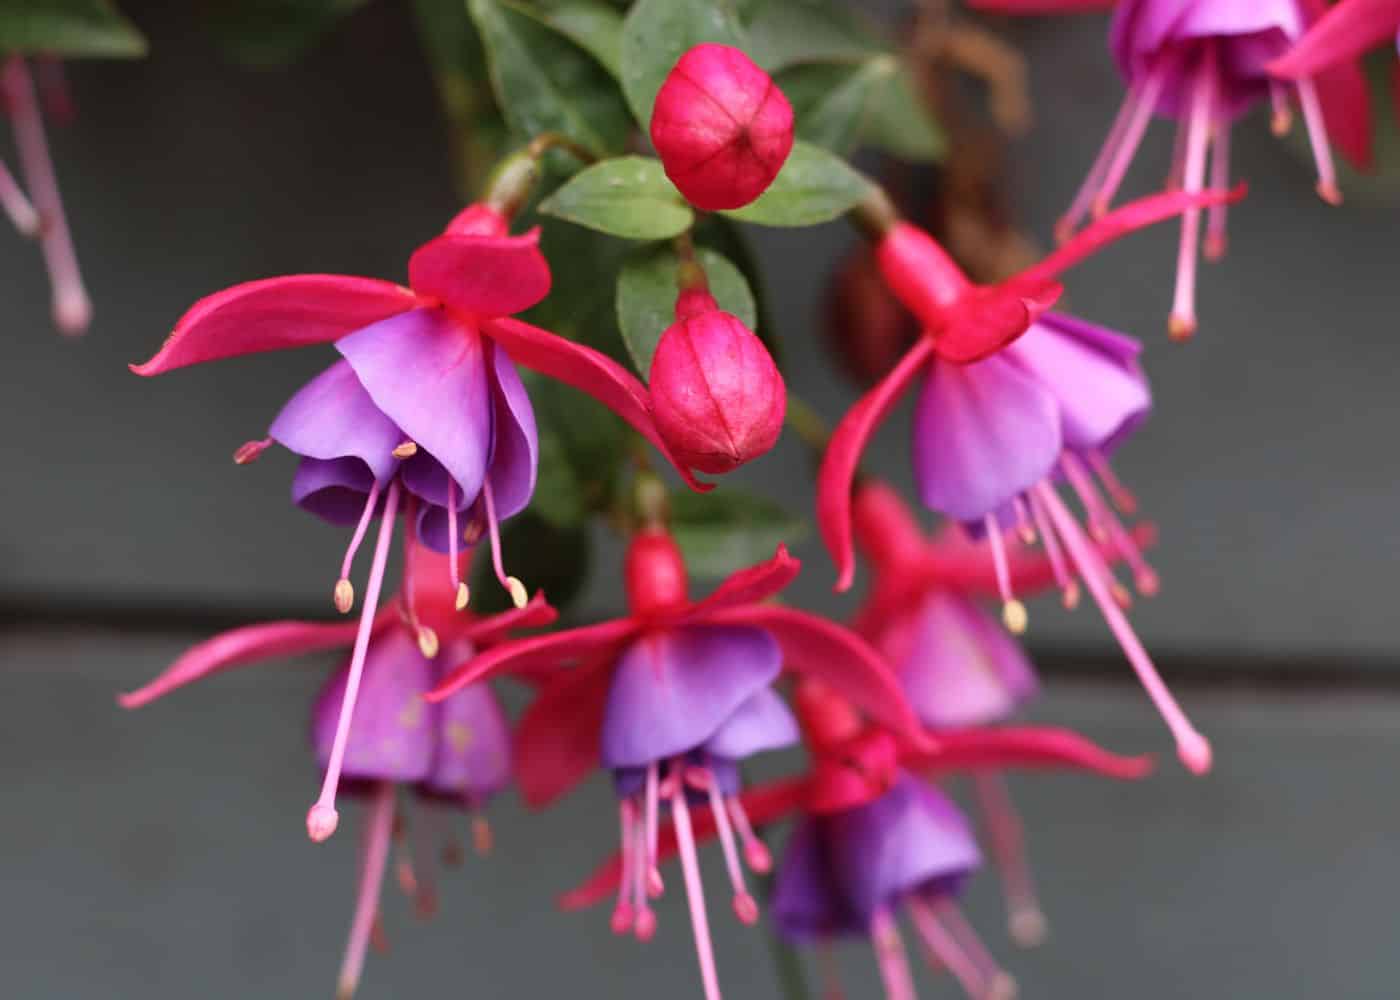 Fuchsia hanging from basket on shady porch